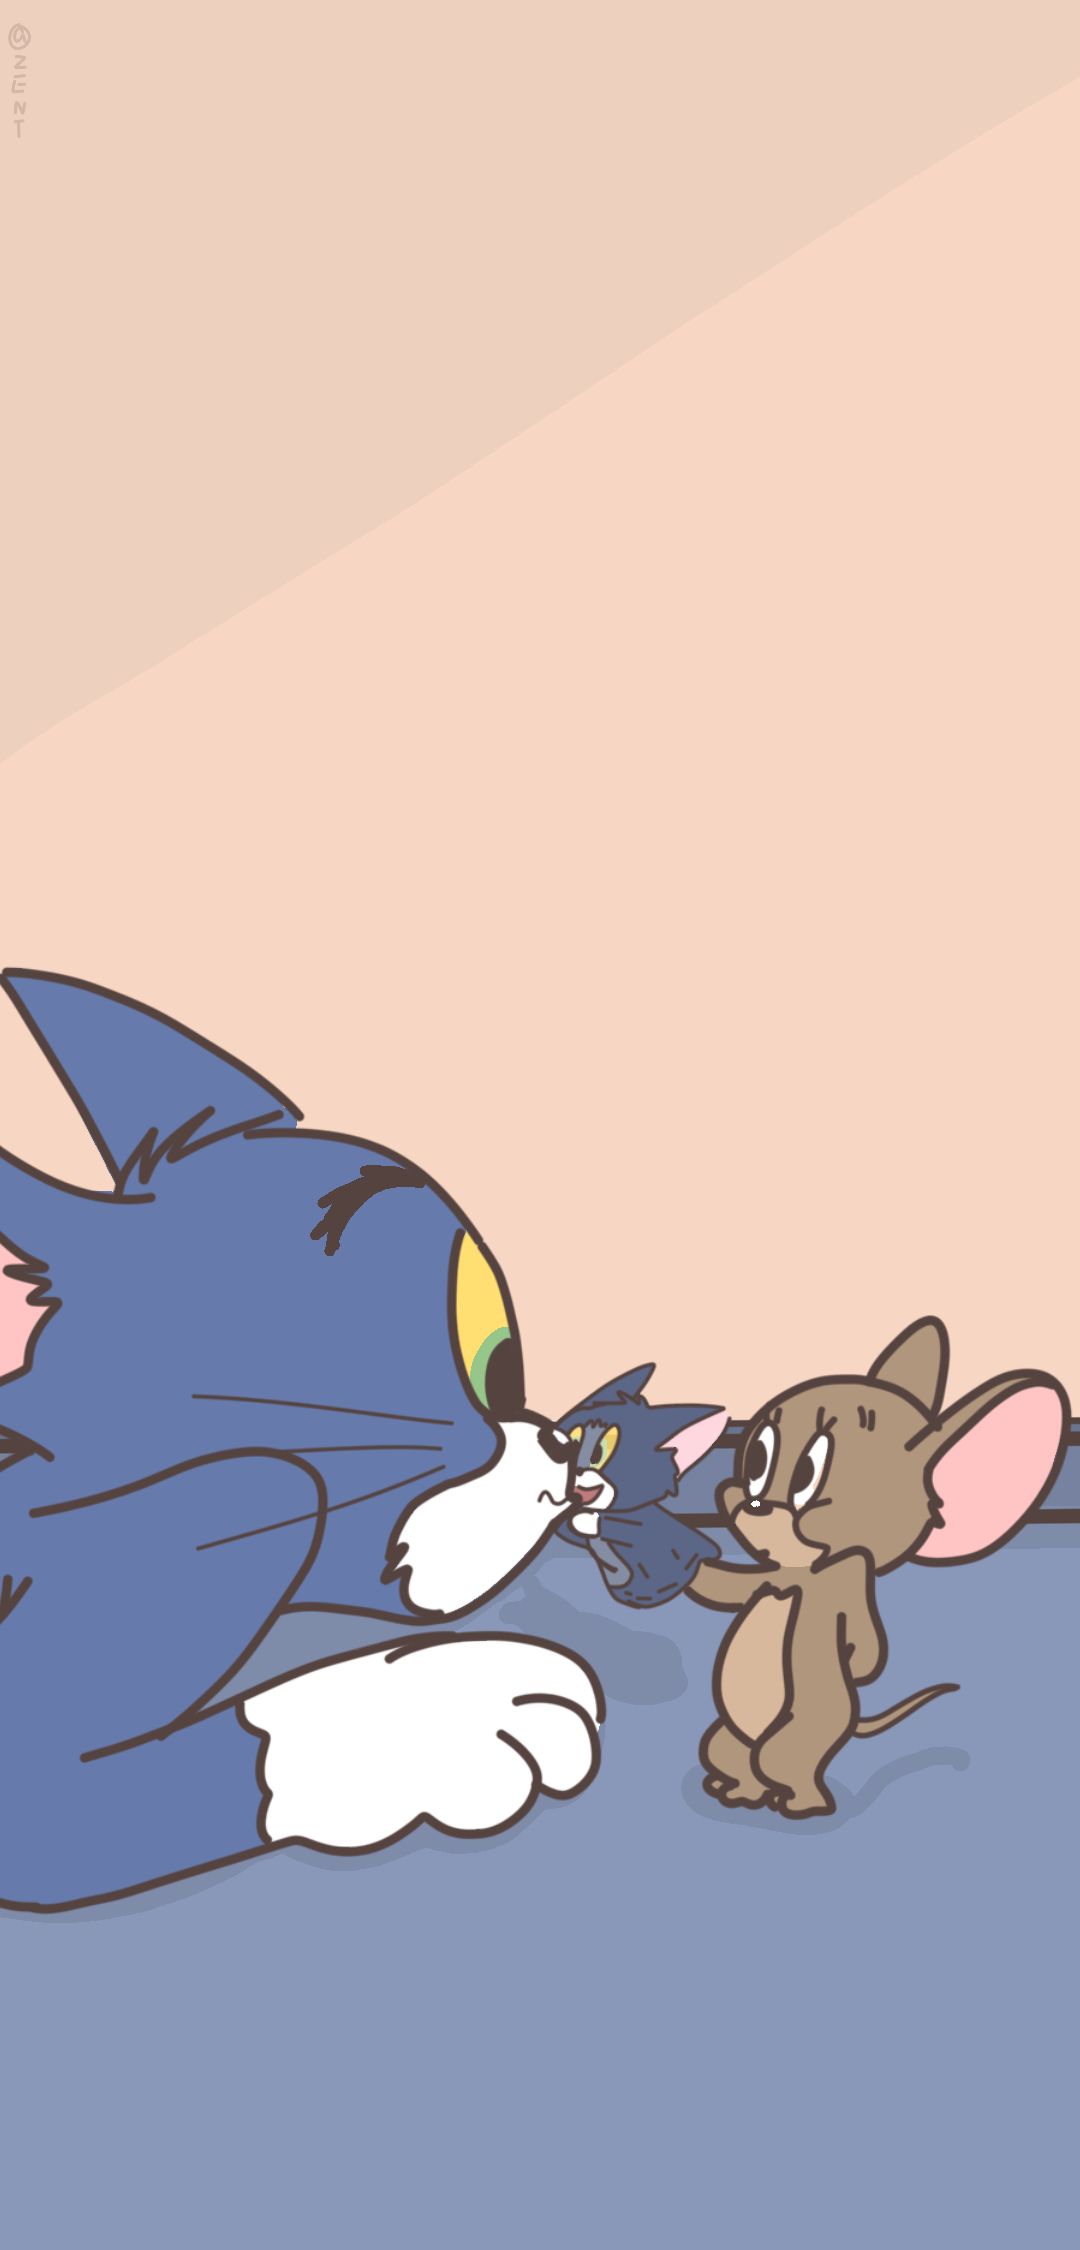 23+ How to Draw Tom and Jerry Pin em ･ﾟ *･ mcu spiderman ･* ･ﾟ | Images ...